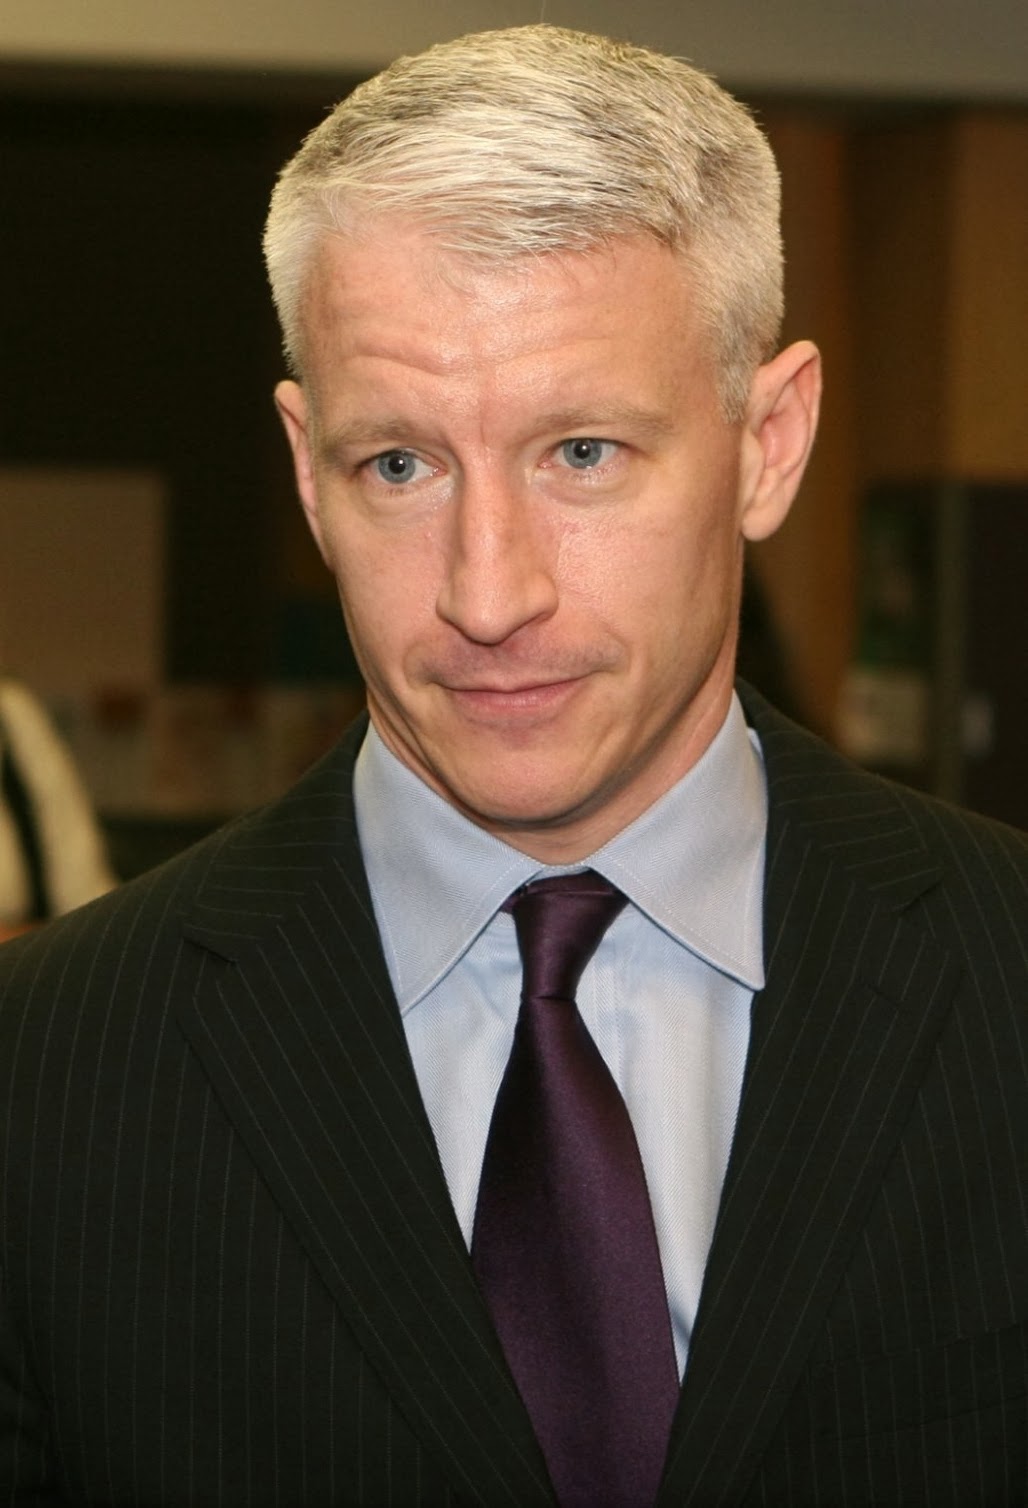 Bohol's Roving Eye: So Who Is Anderson Cooper?